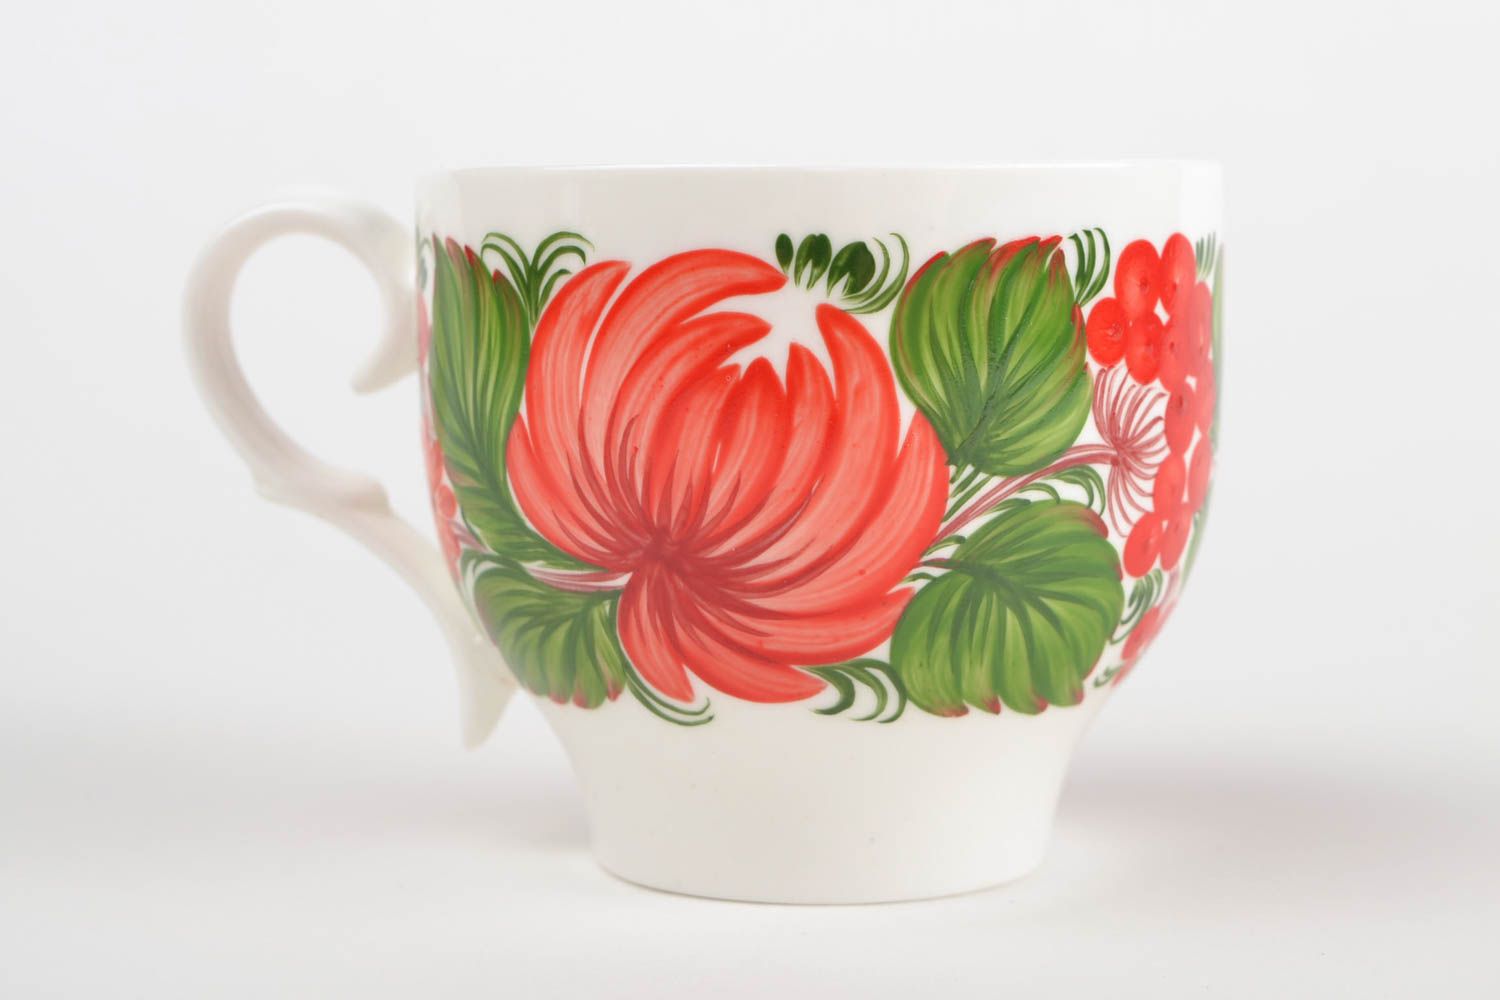 8 oz ceramic porcelain cup in white, red, and green color with handle and Russian style pattern photo 3